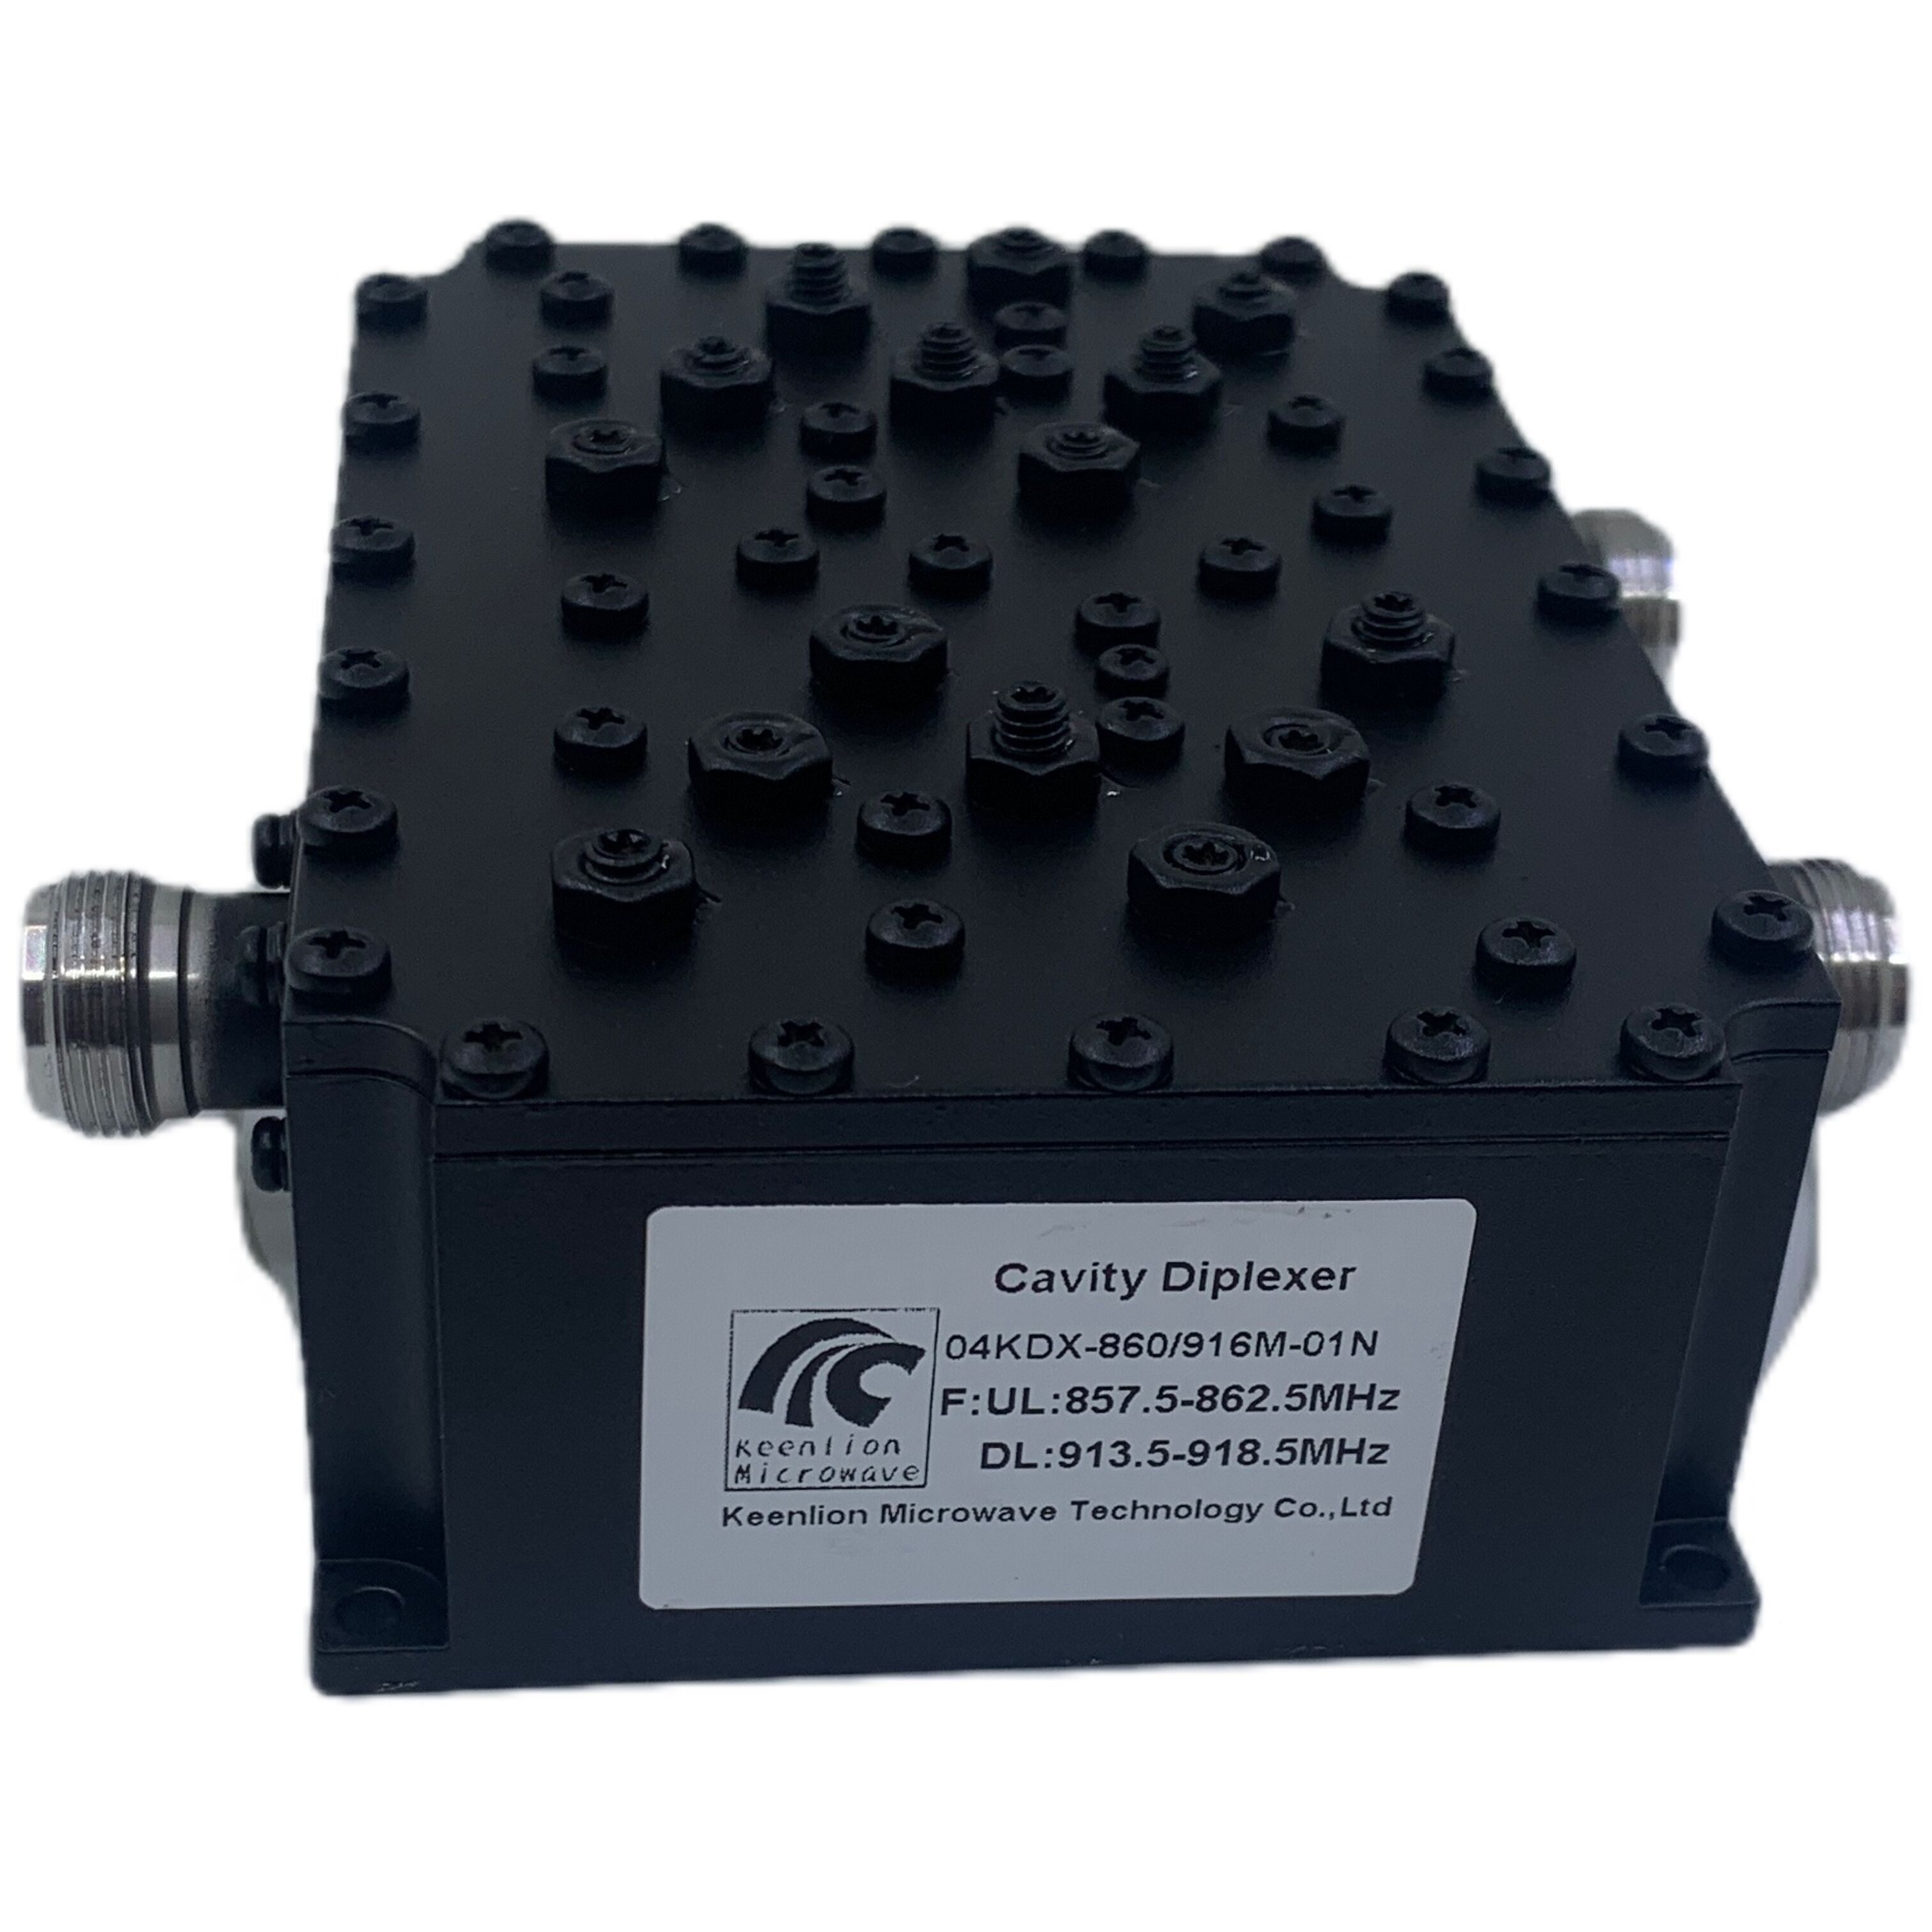 857.5-862.5MHz/913.5-918.5MHz Duplexer/Diplexer for Mobile Communication Applications